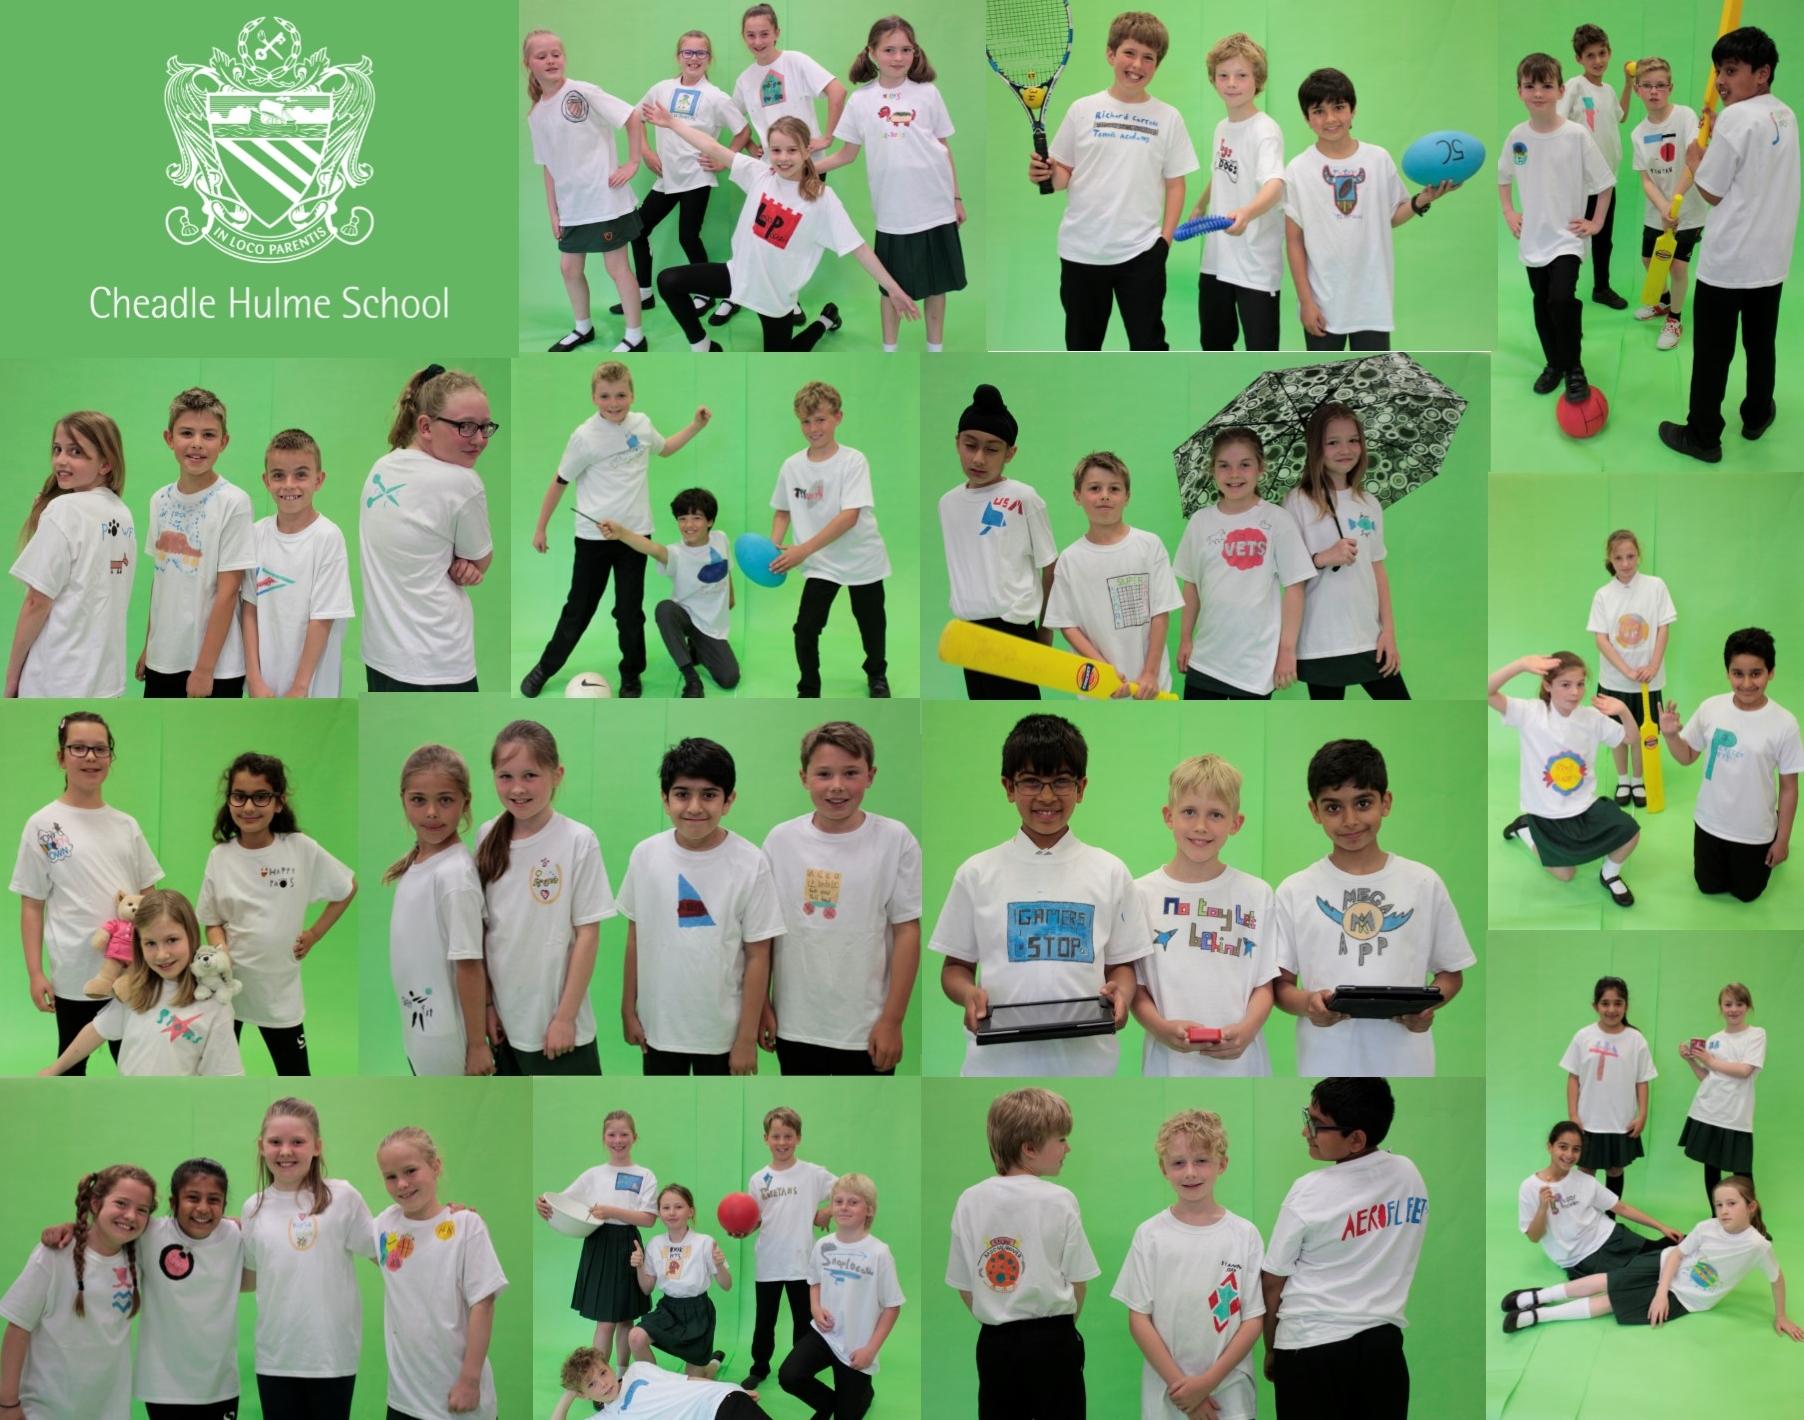 cheadle hulme school junior students in year 5 model t-shirts featuring their own logo designs as part of a DART art project considering typography and product design